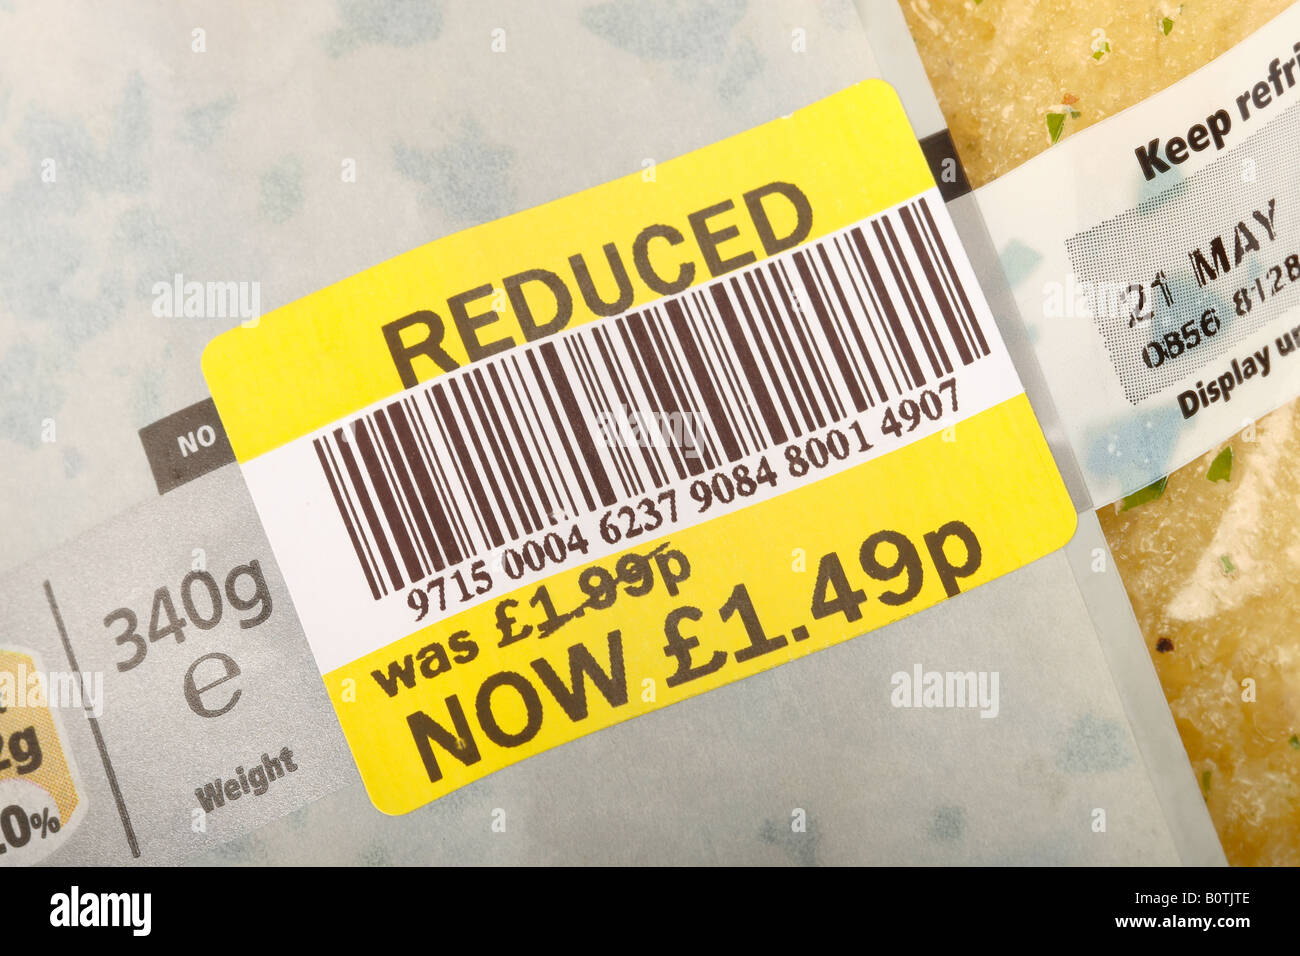 Price-reduced supermarket products